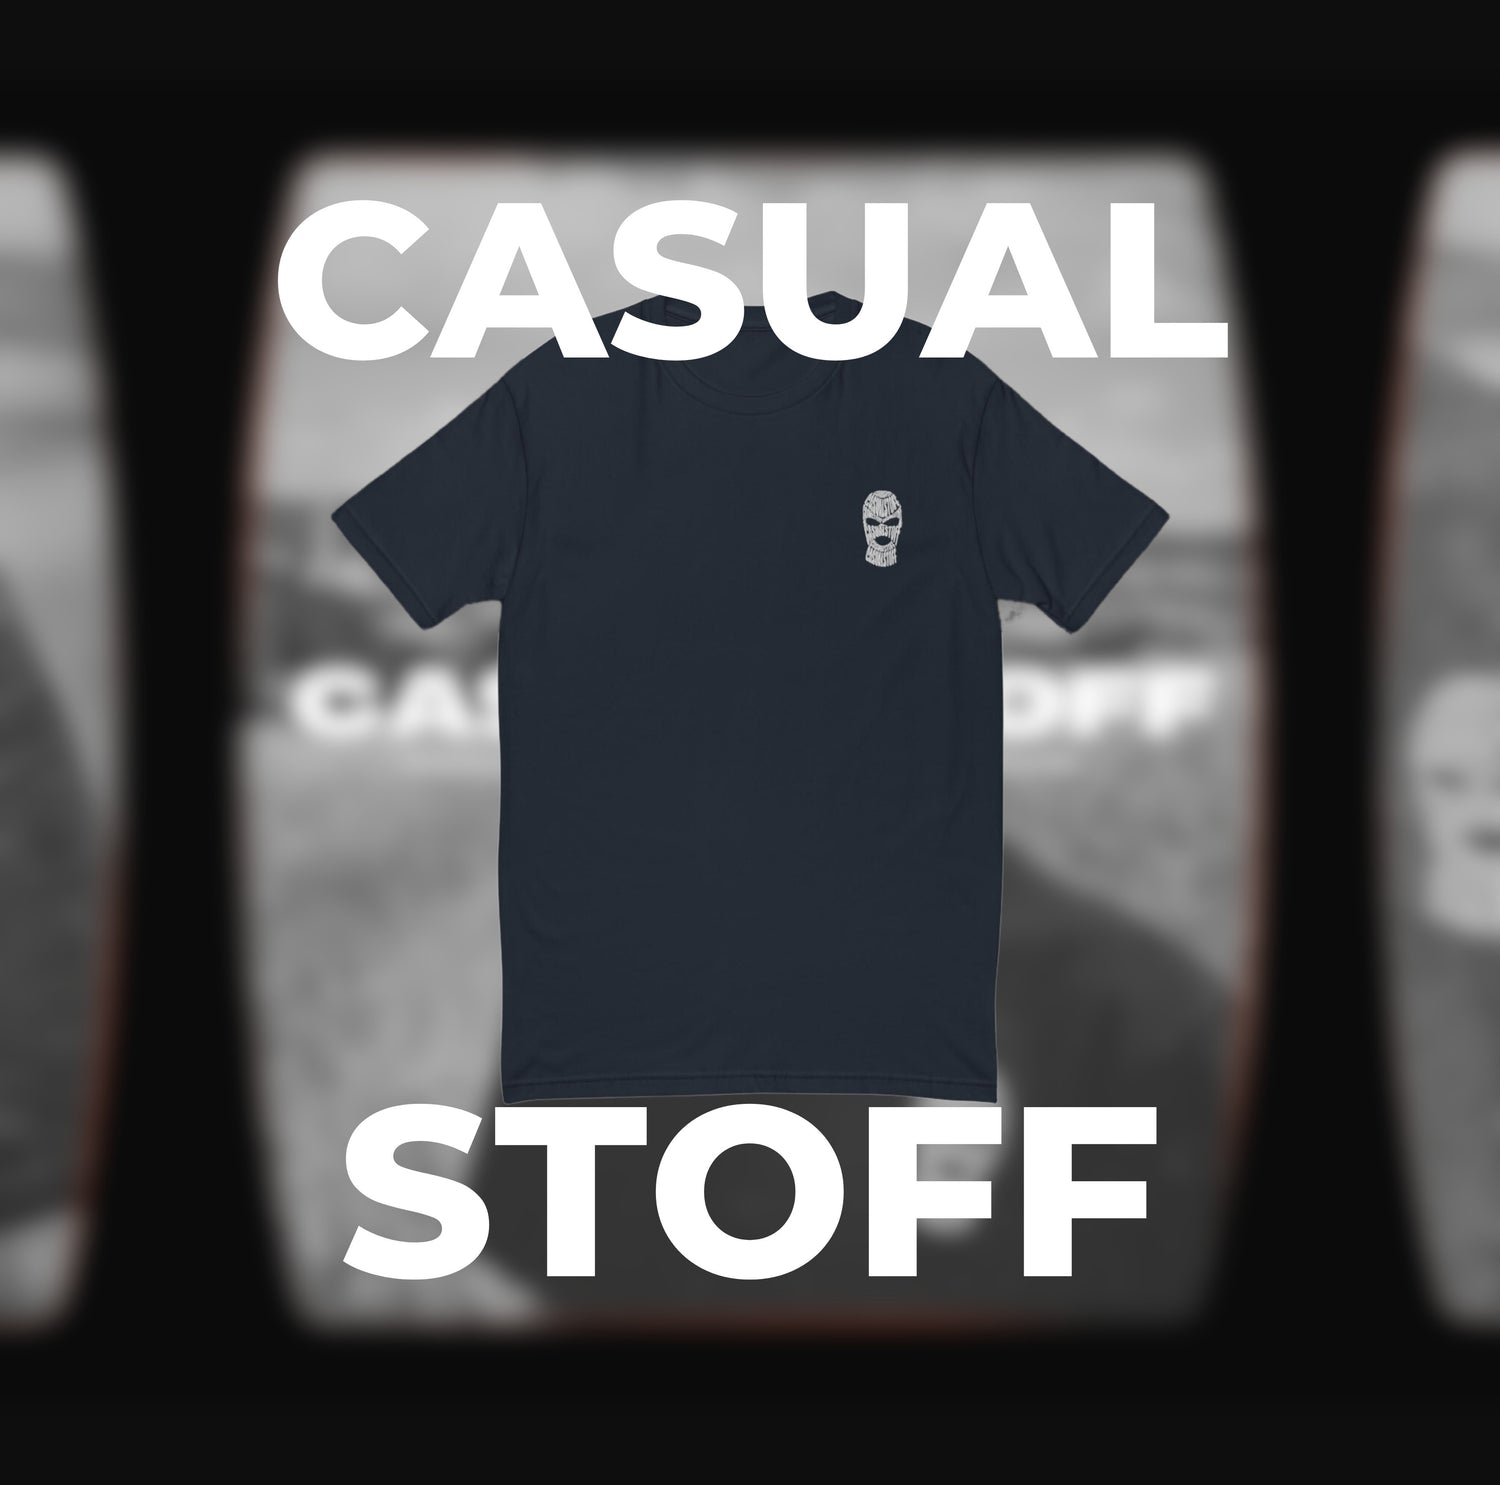 T-Shirt's by Casualstoff